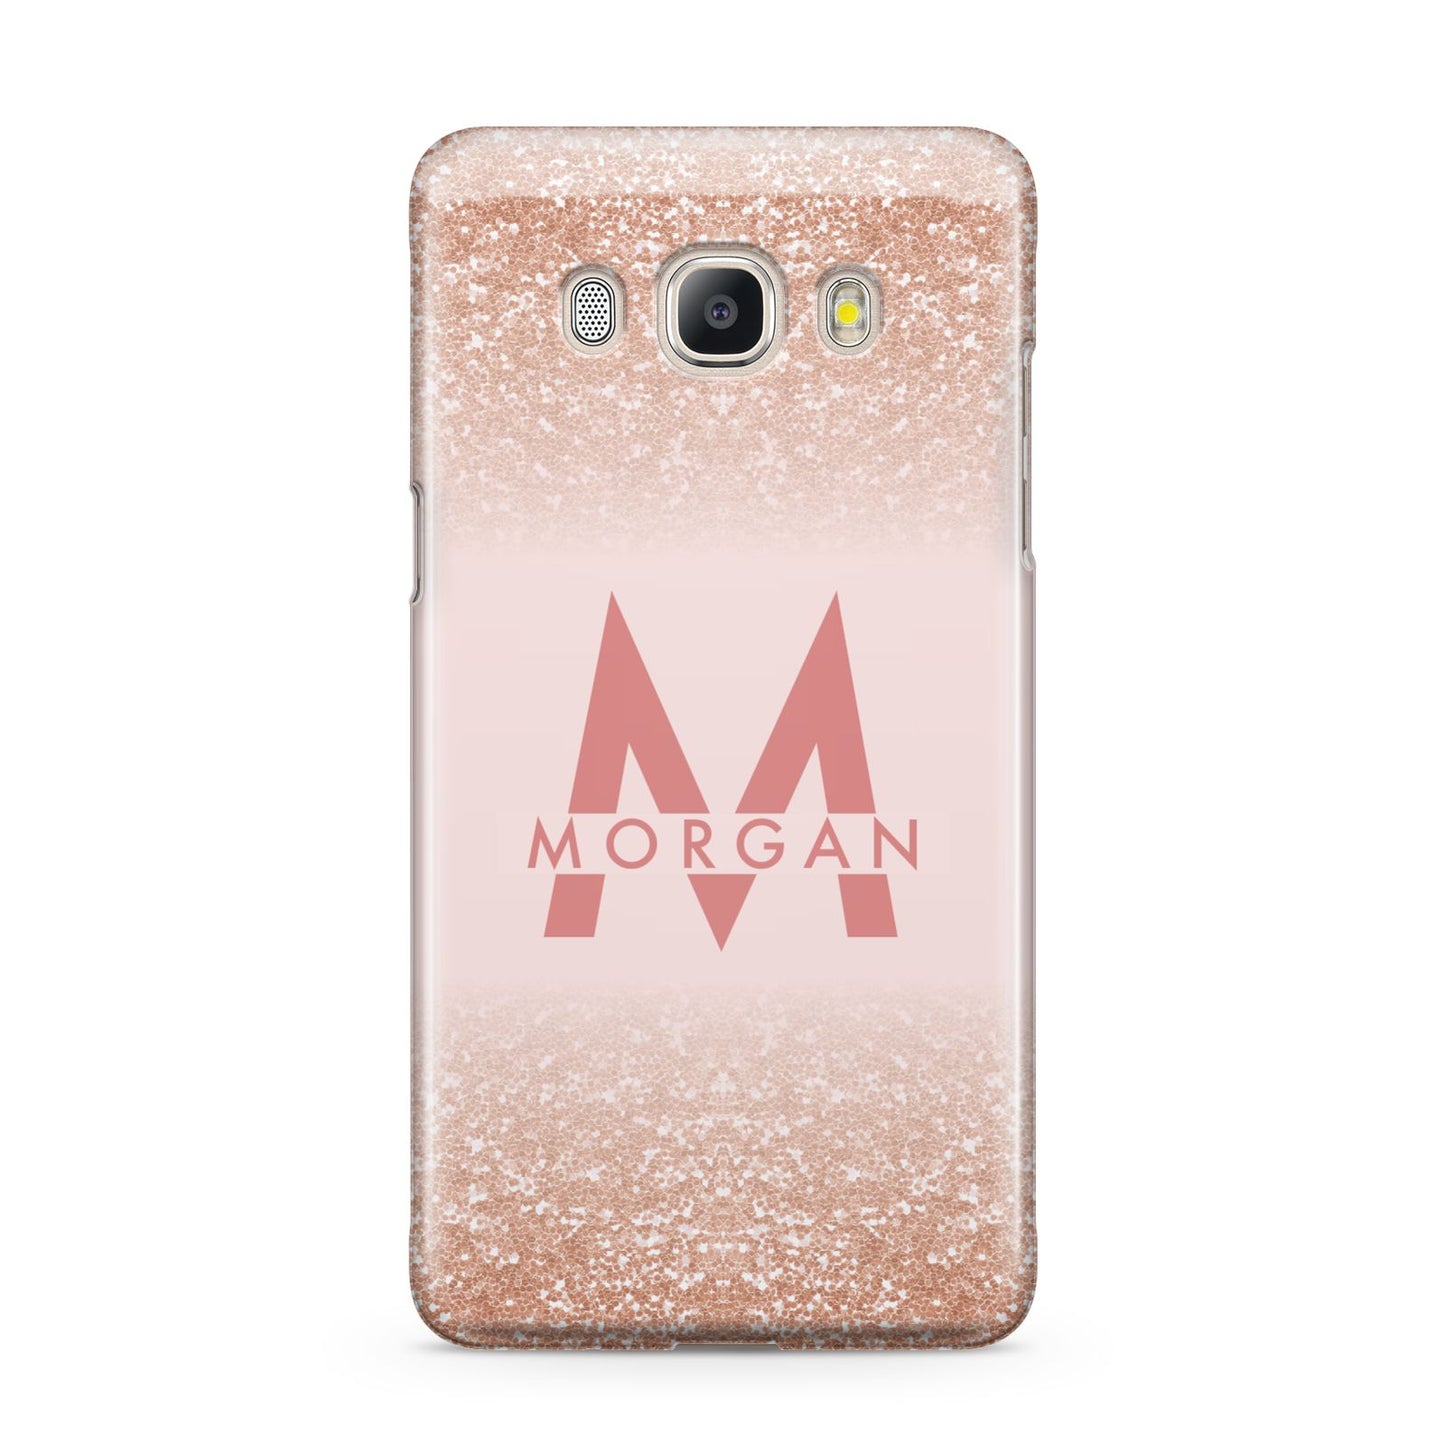 Personalised Printed Glitter Name Initials Samsung Galaxy J5 2016 Case